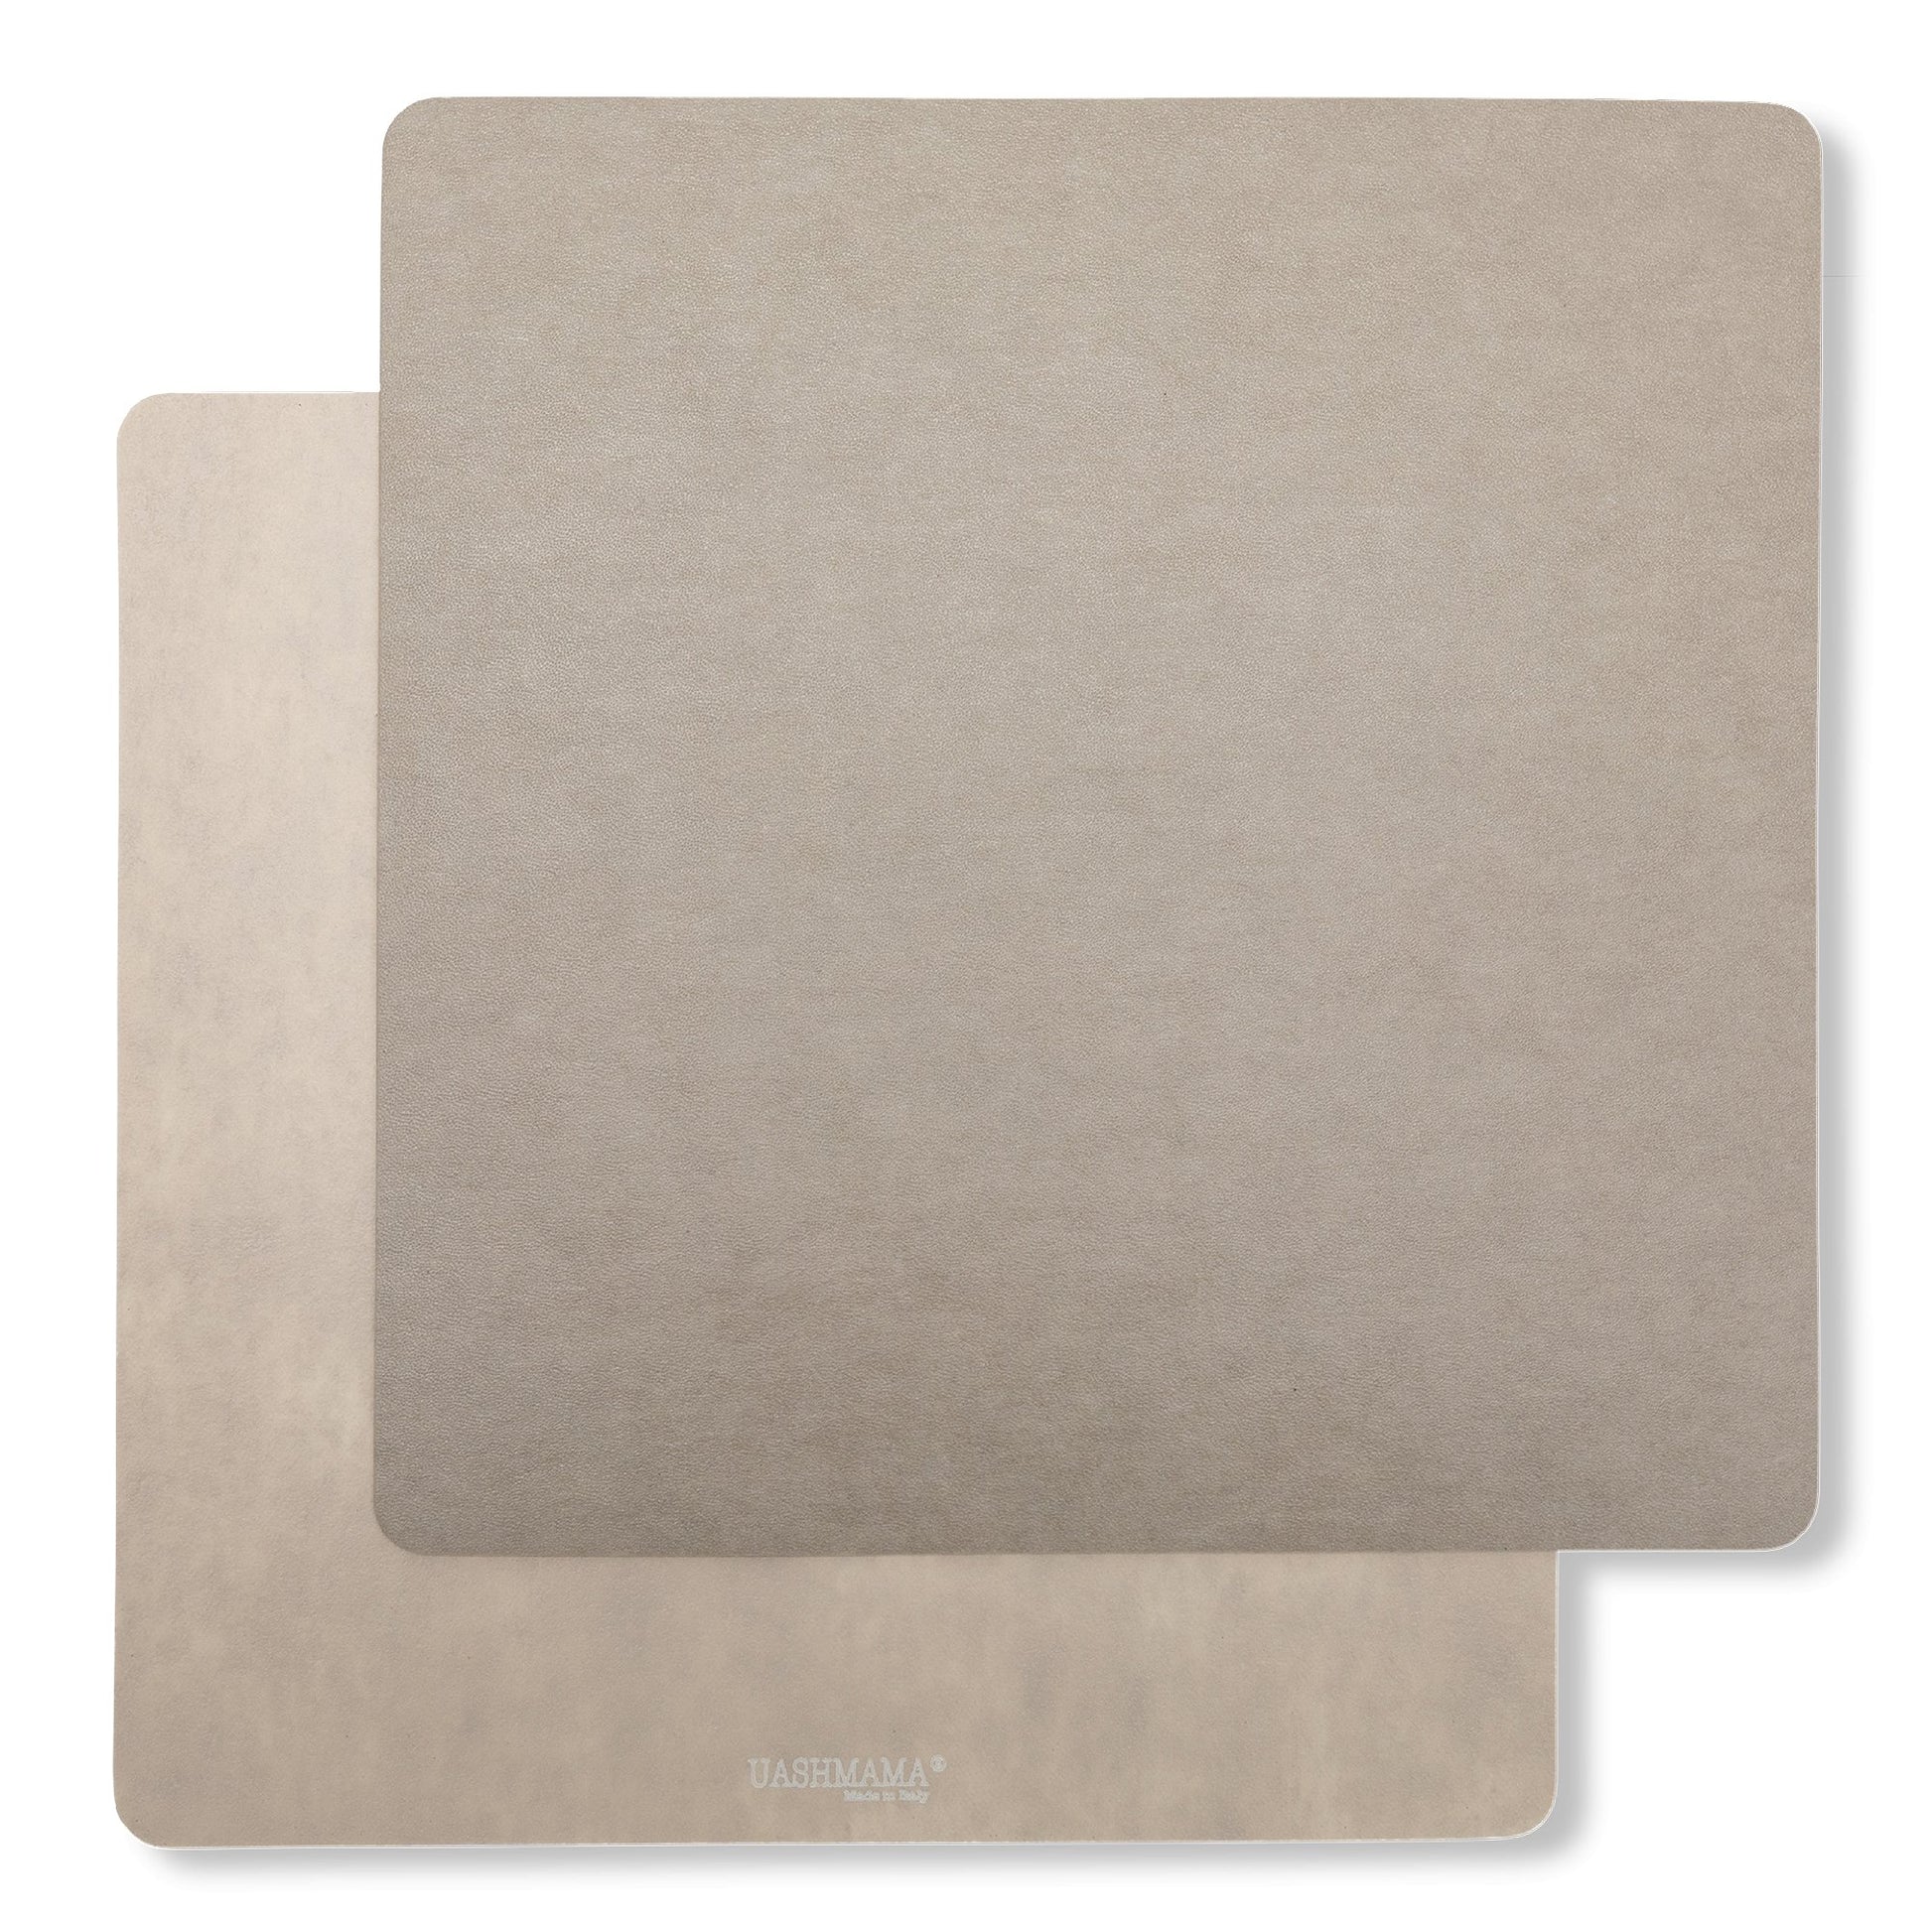 Two square washable paper placemats are shown one on top of the other. The one in the foreground is grey and the one at the rear is beige.